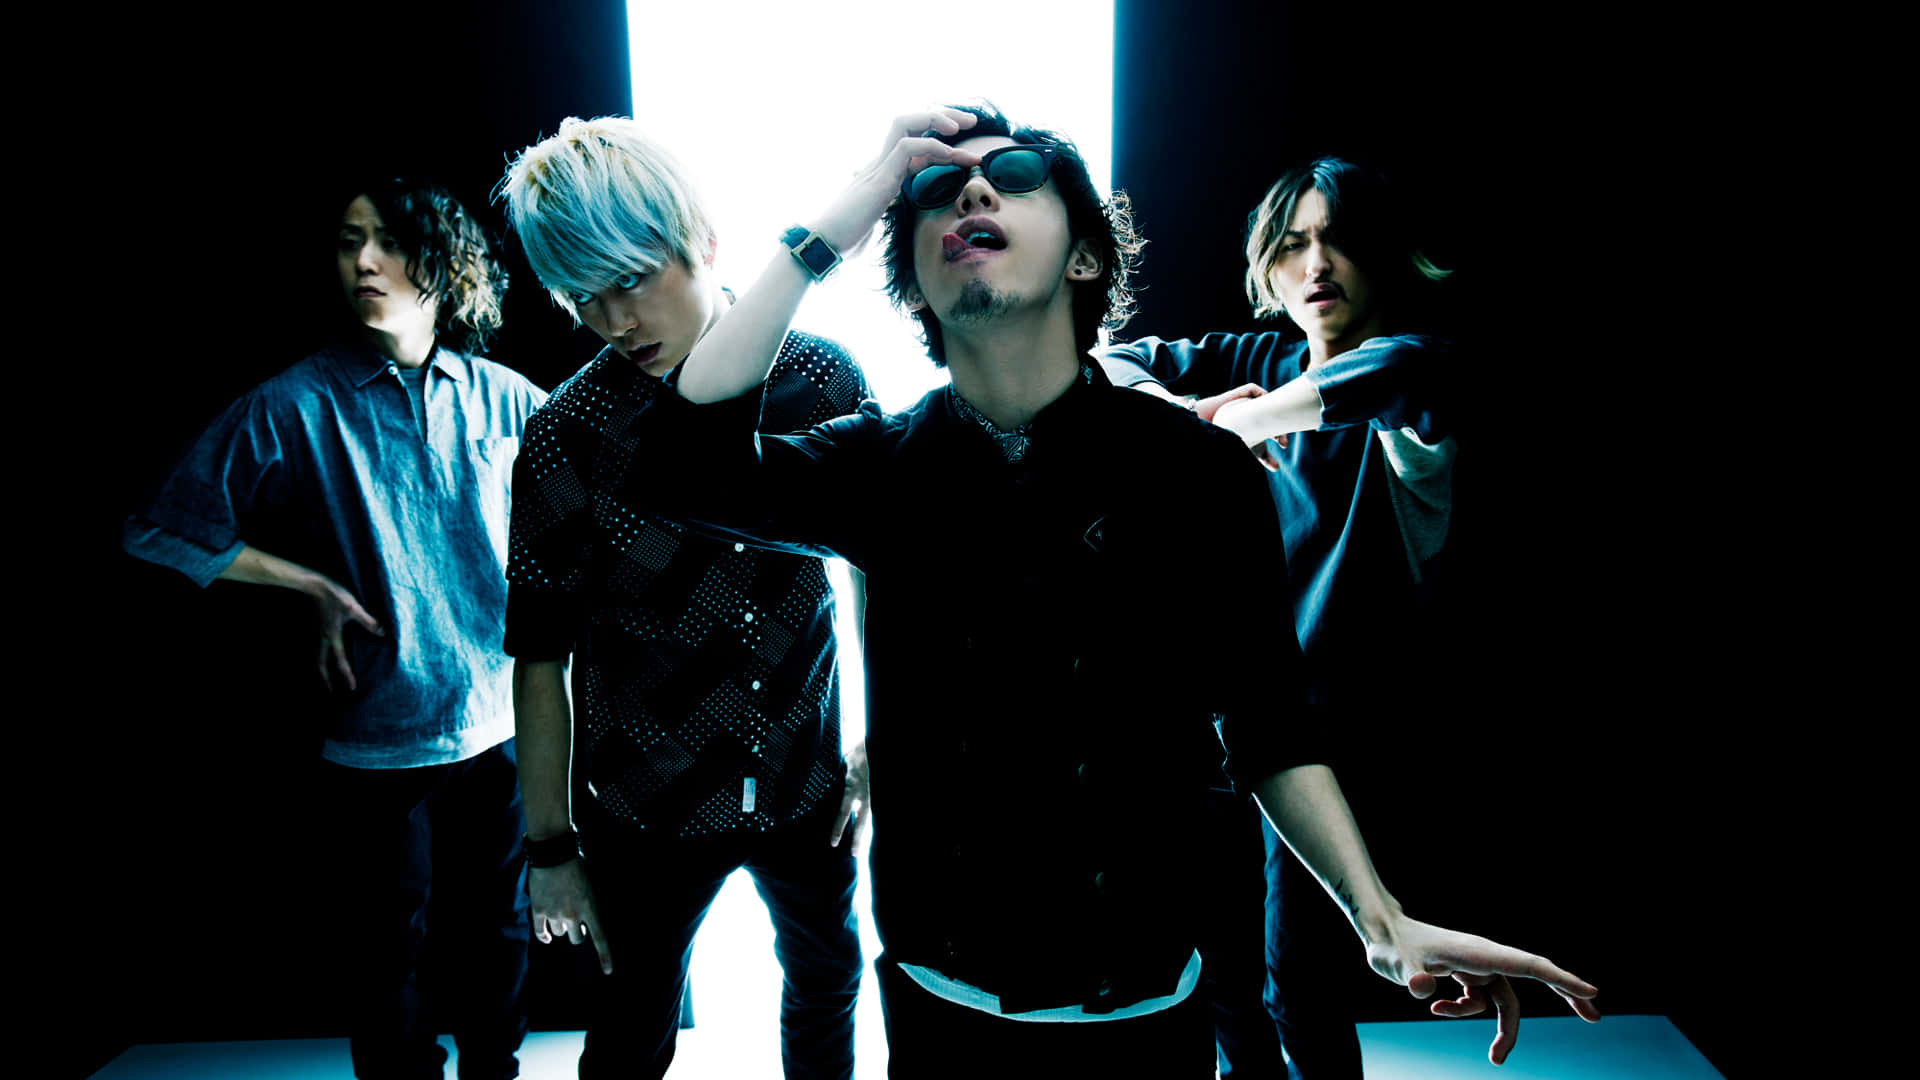 J-Rock band performing live on stage Wallpaper